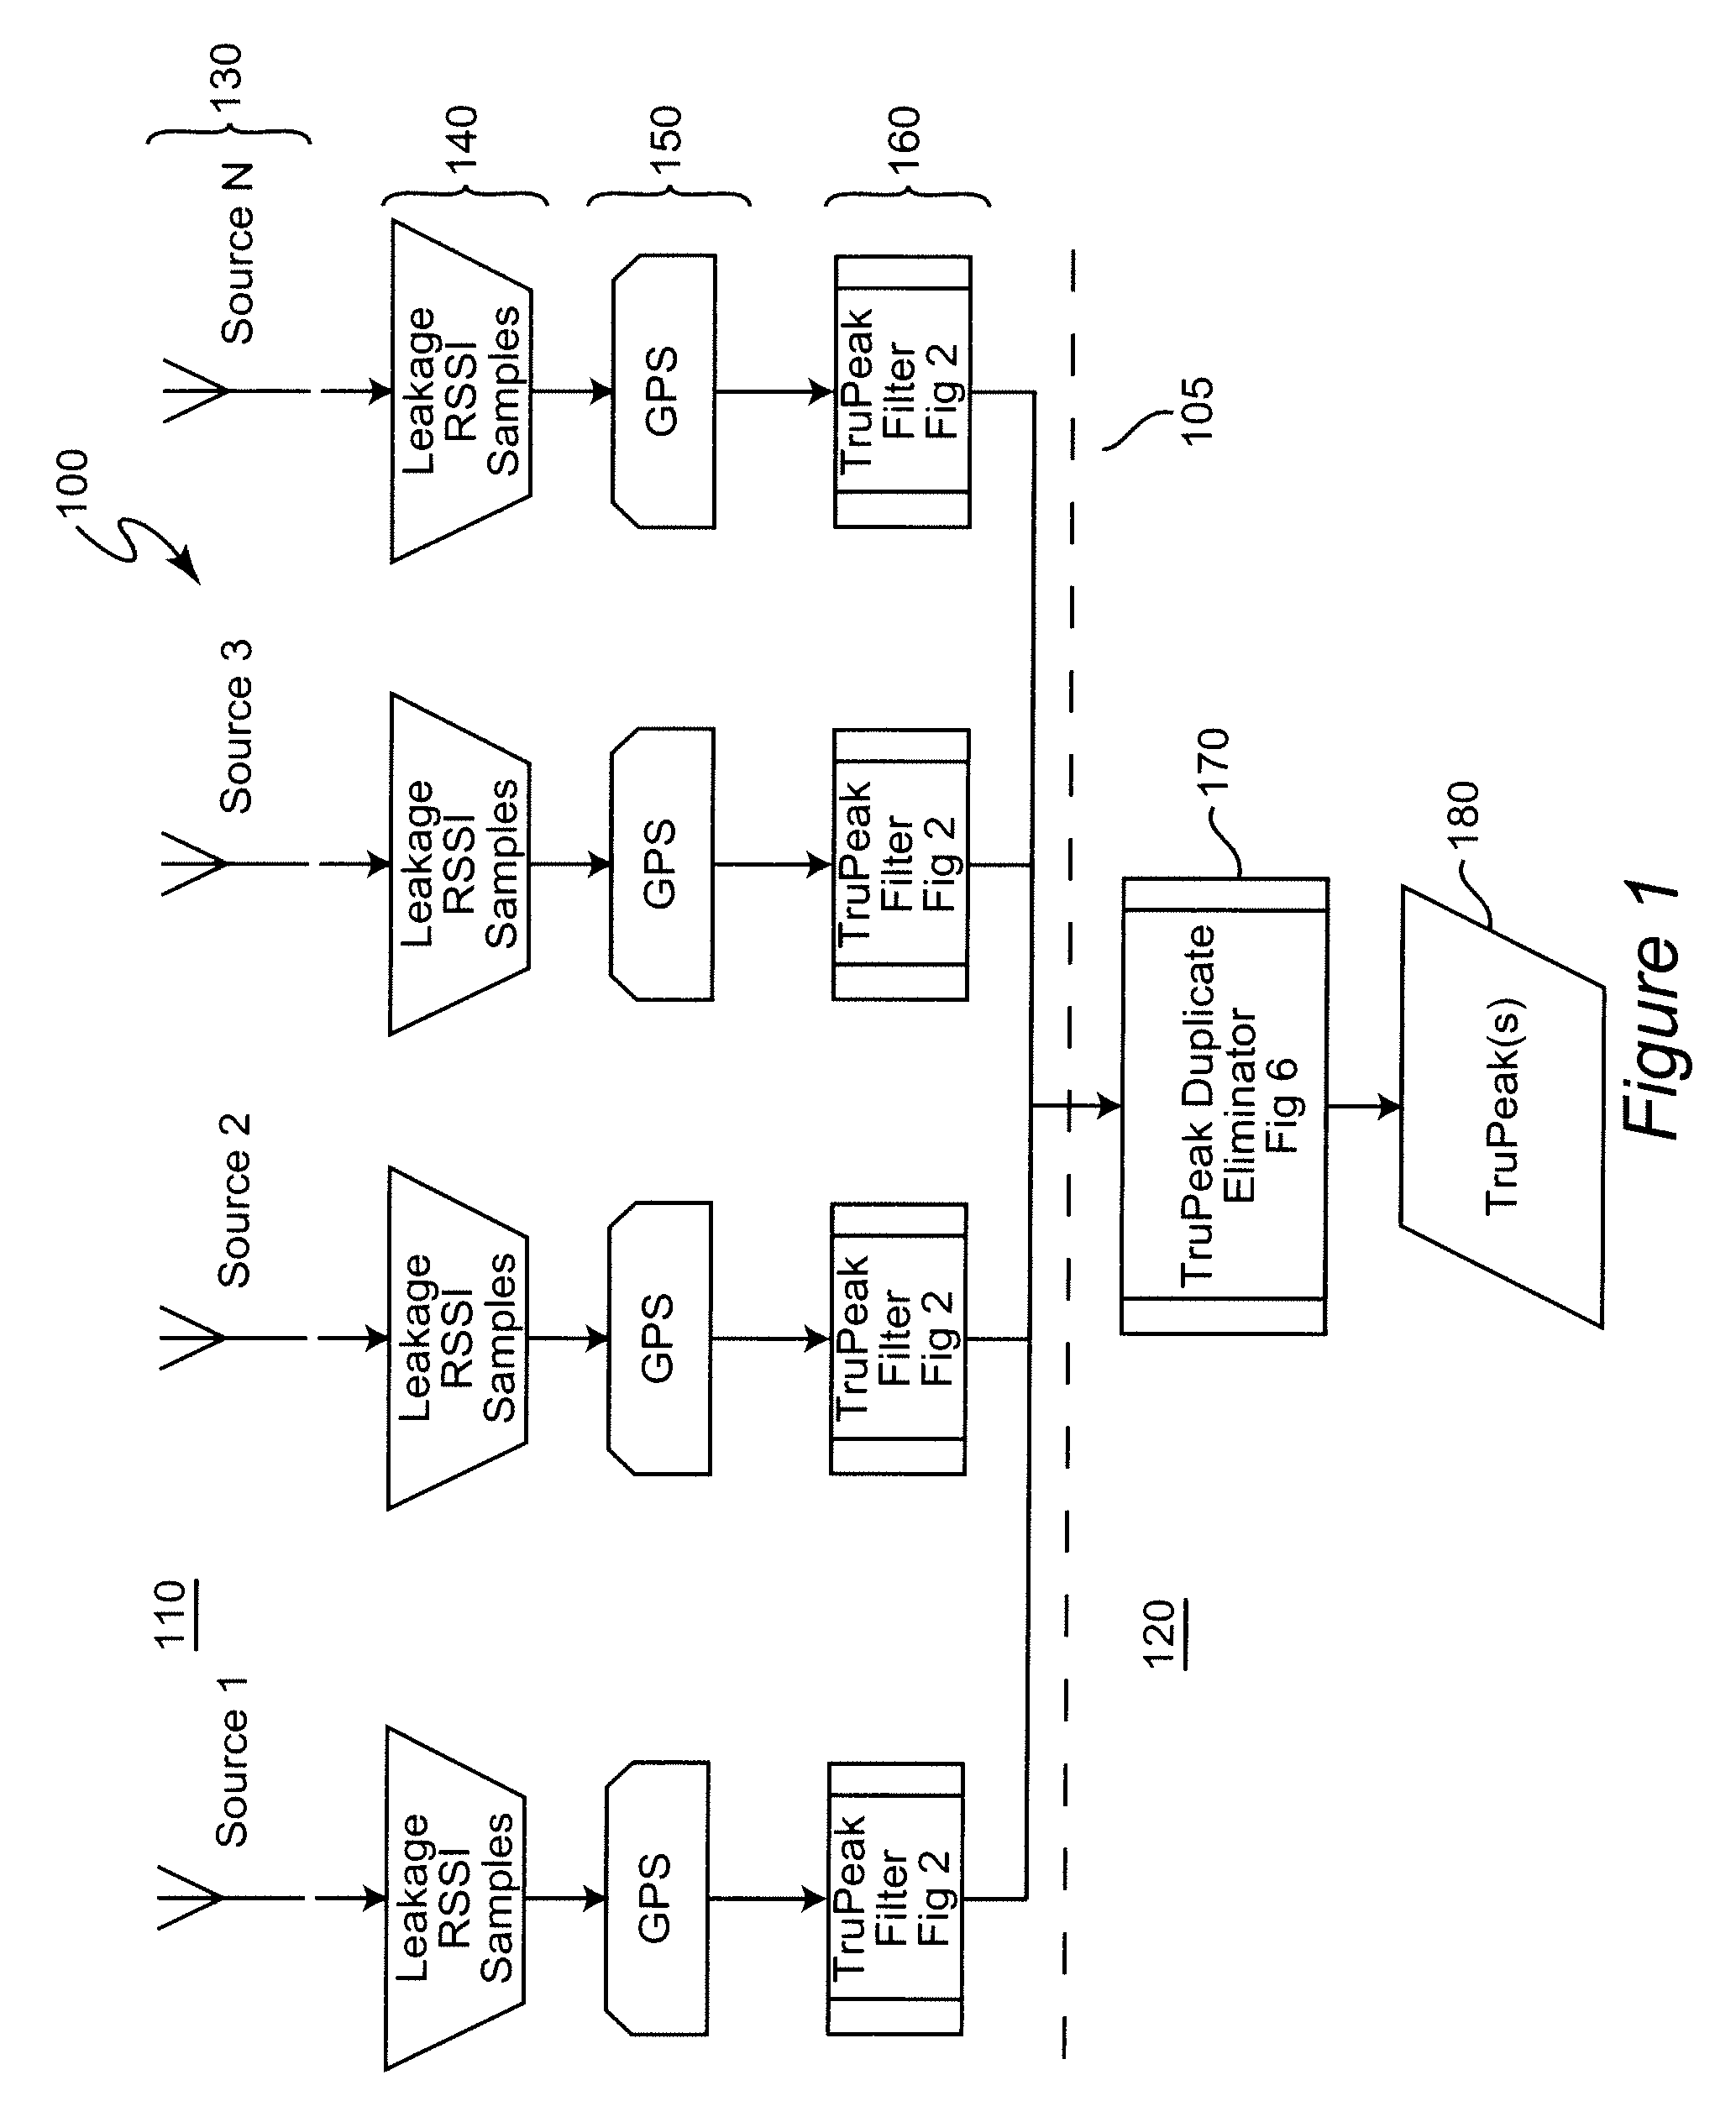 System and method for sorting detection of signal egress from a wired communication system